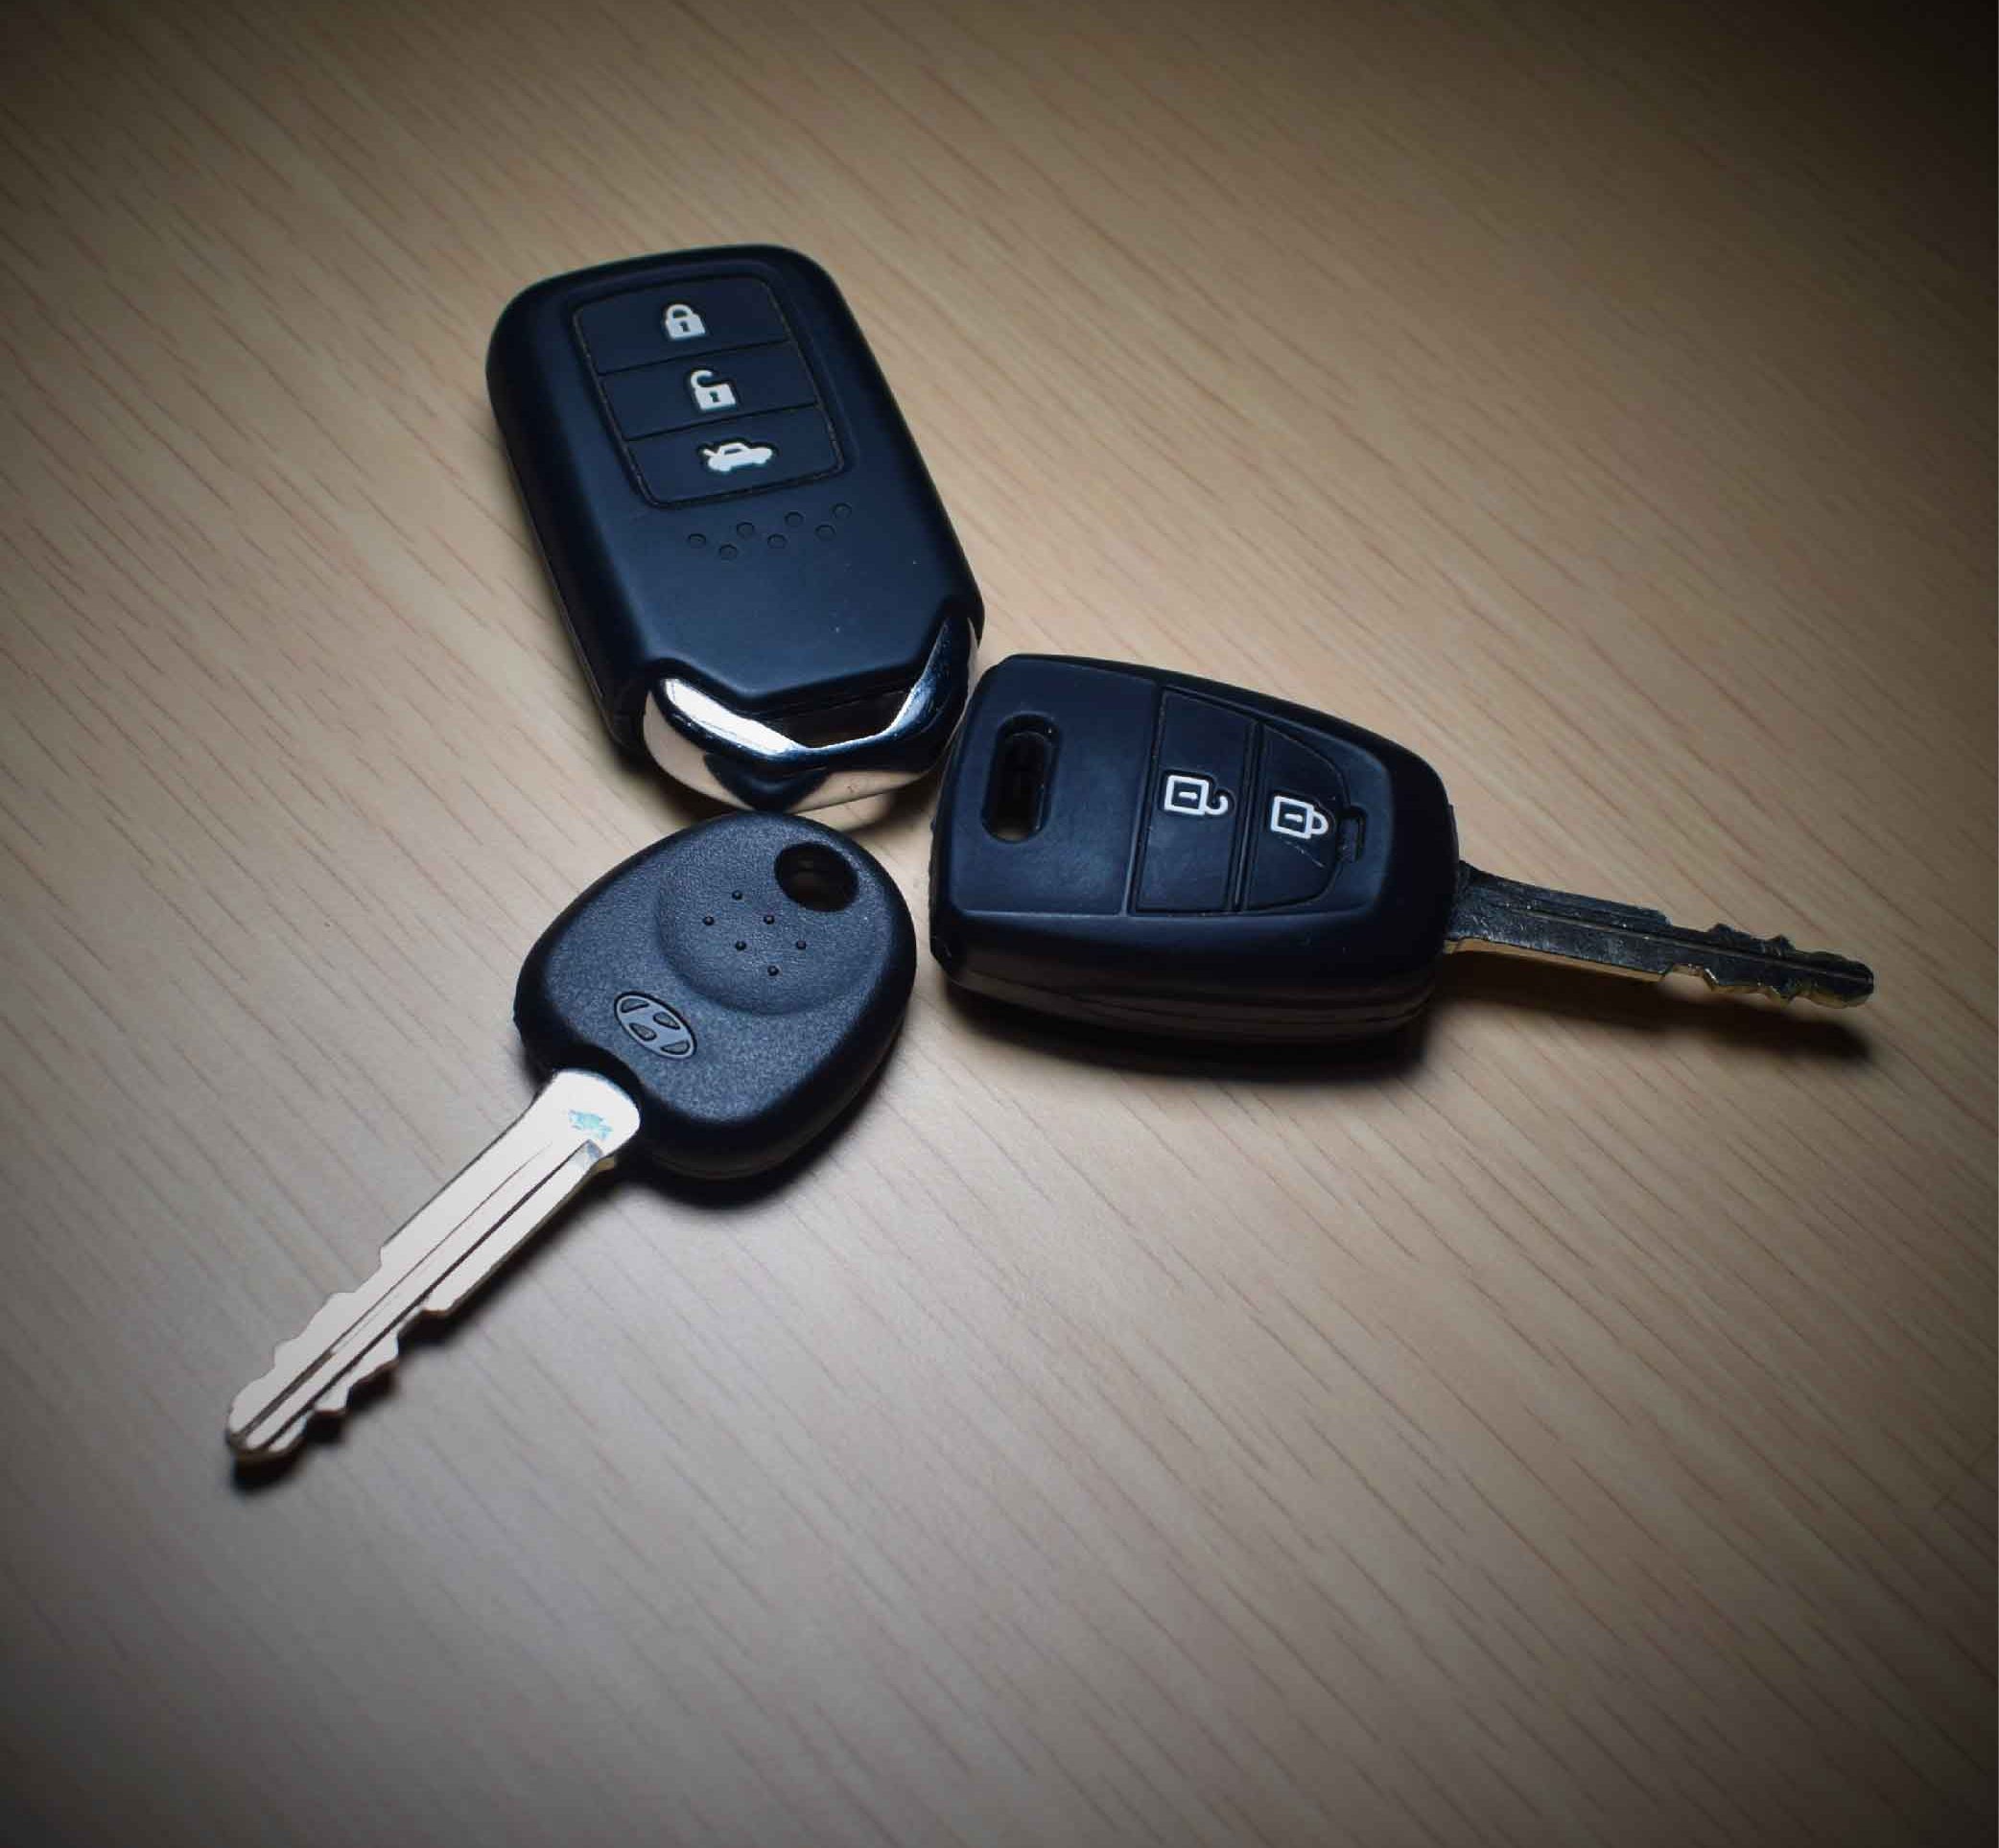 Honda Key Fob Battery Replacement Cost